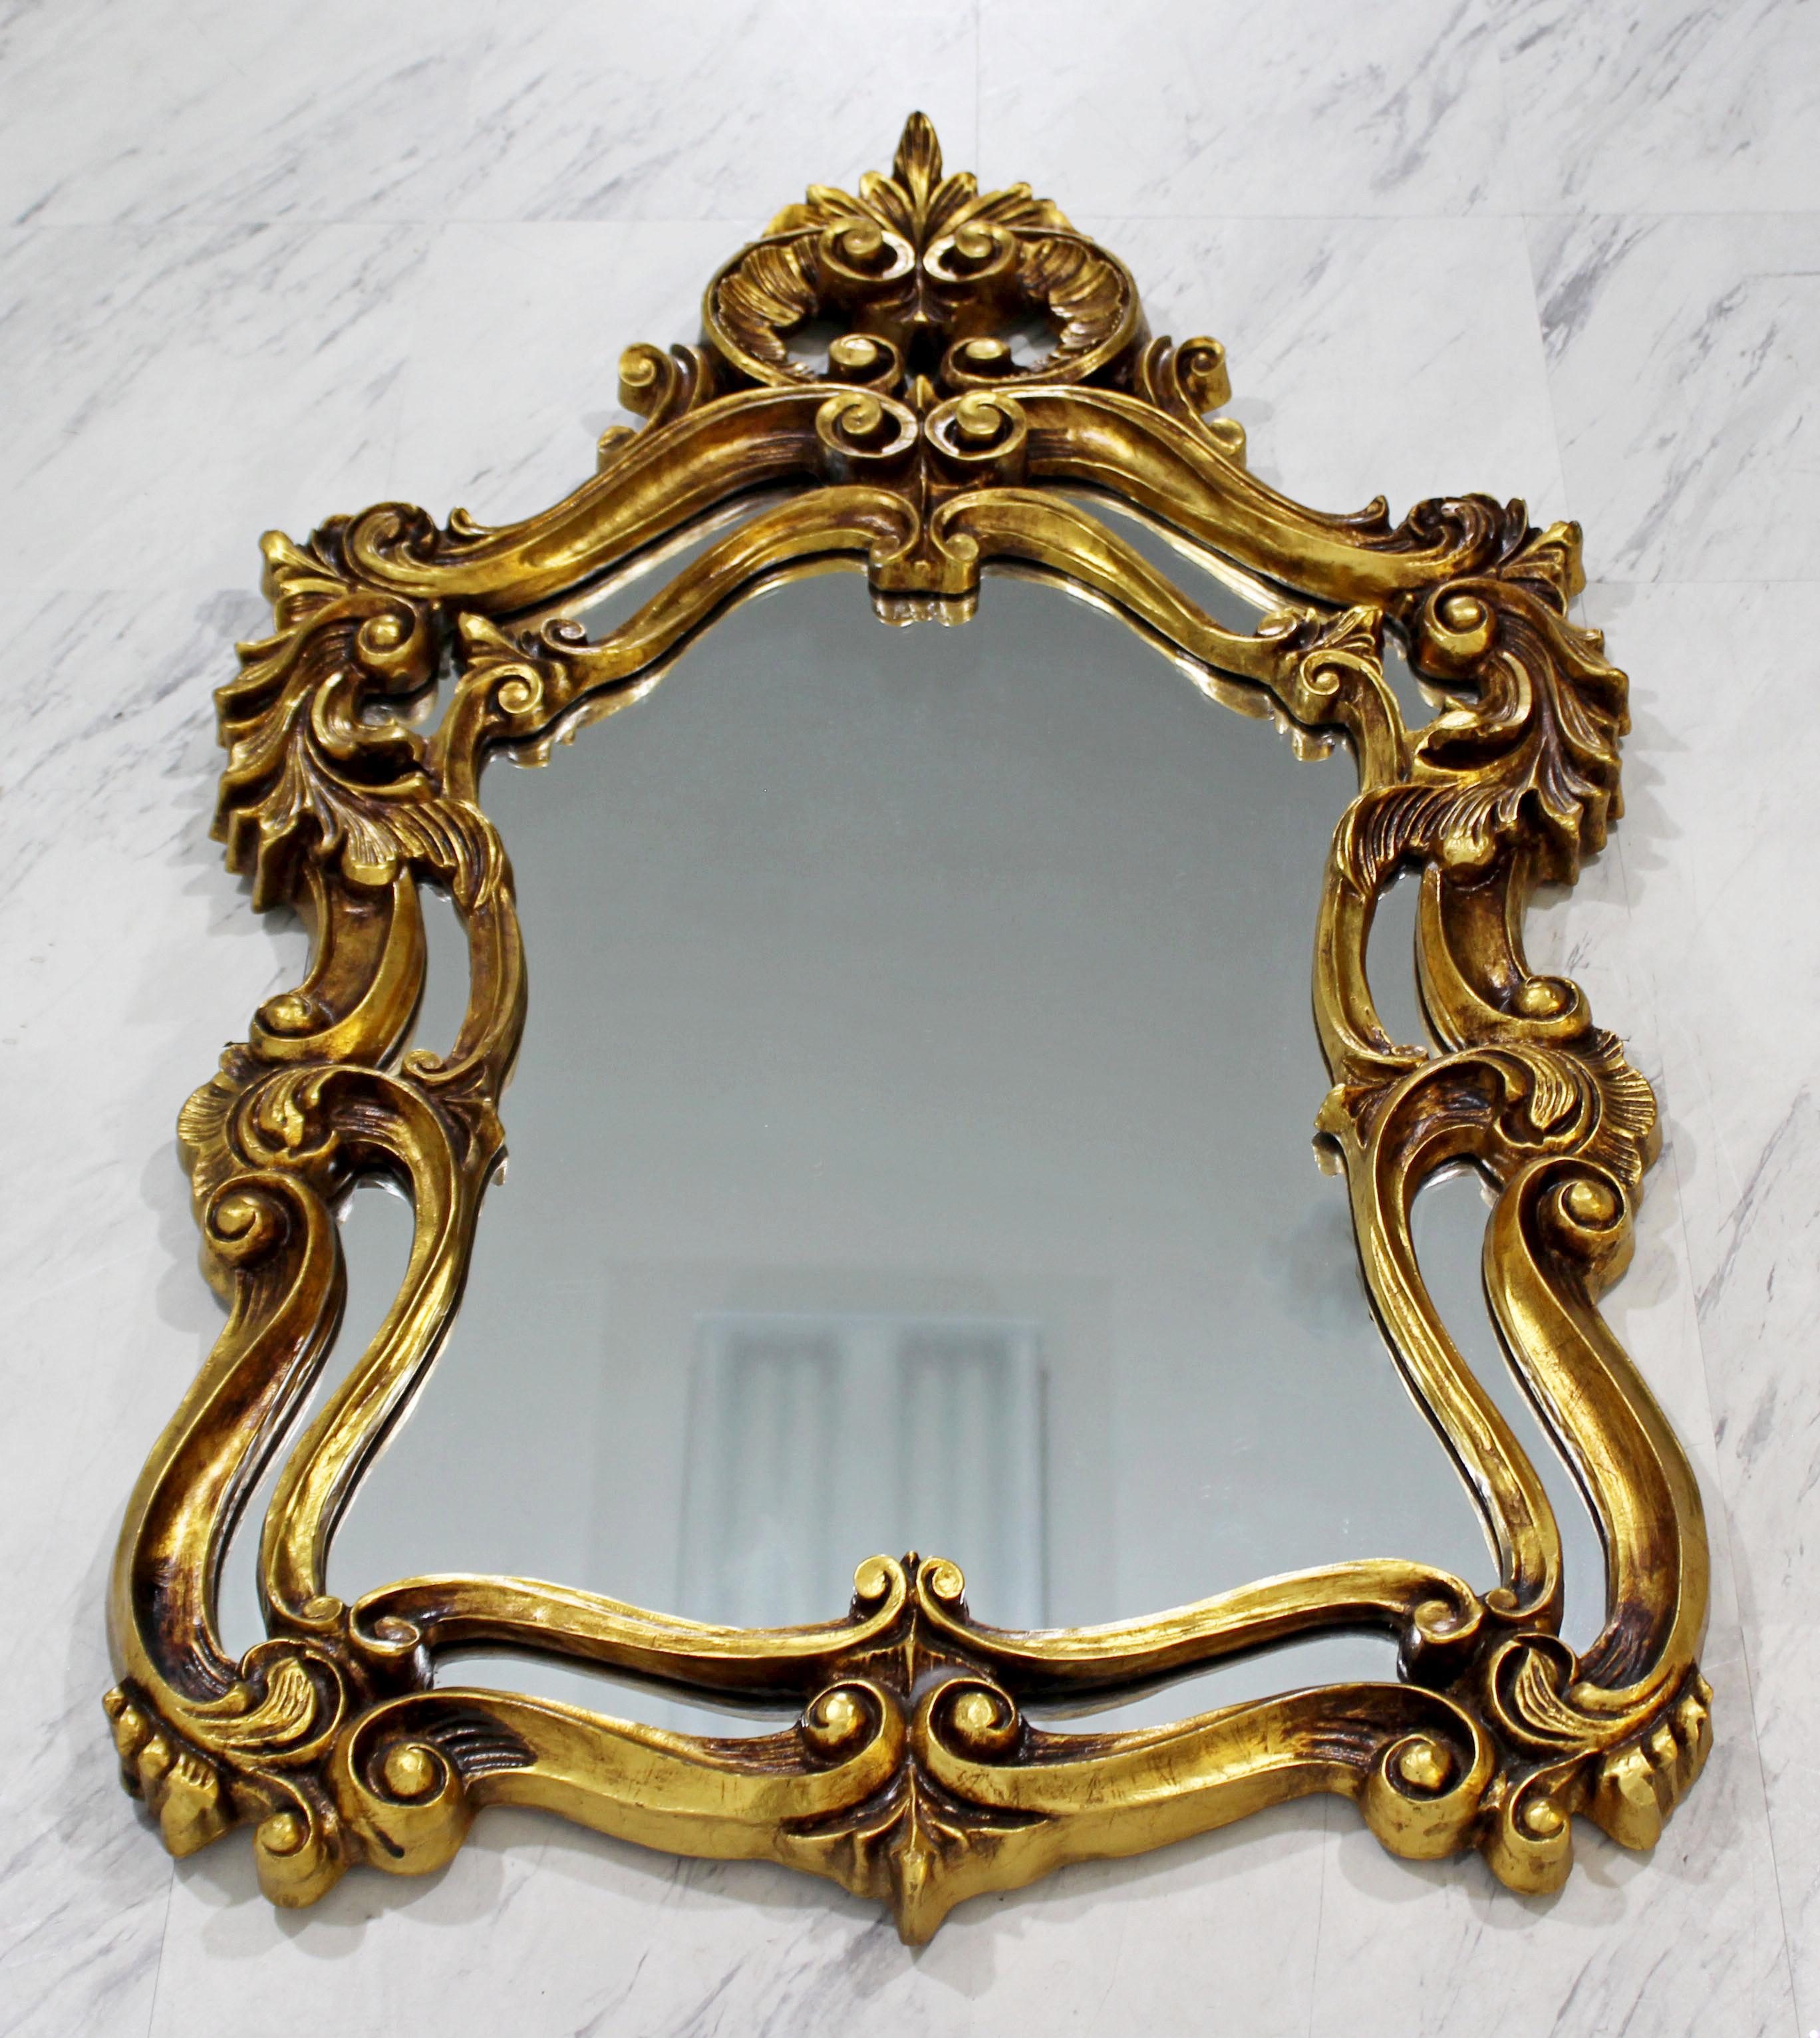 For your consideration is a stunning pair of intricate, gold leaf gilt painted wood, hanging wall mirrors. In excellent condition. The dimensions are 26.5